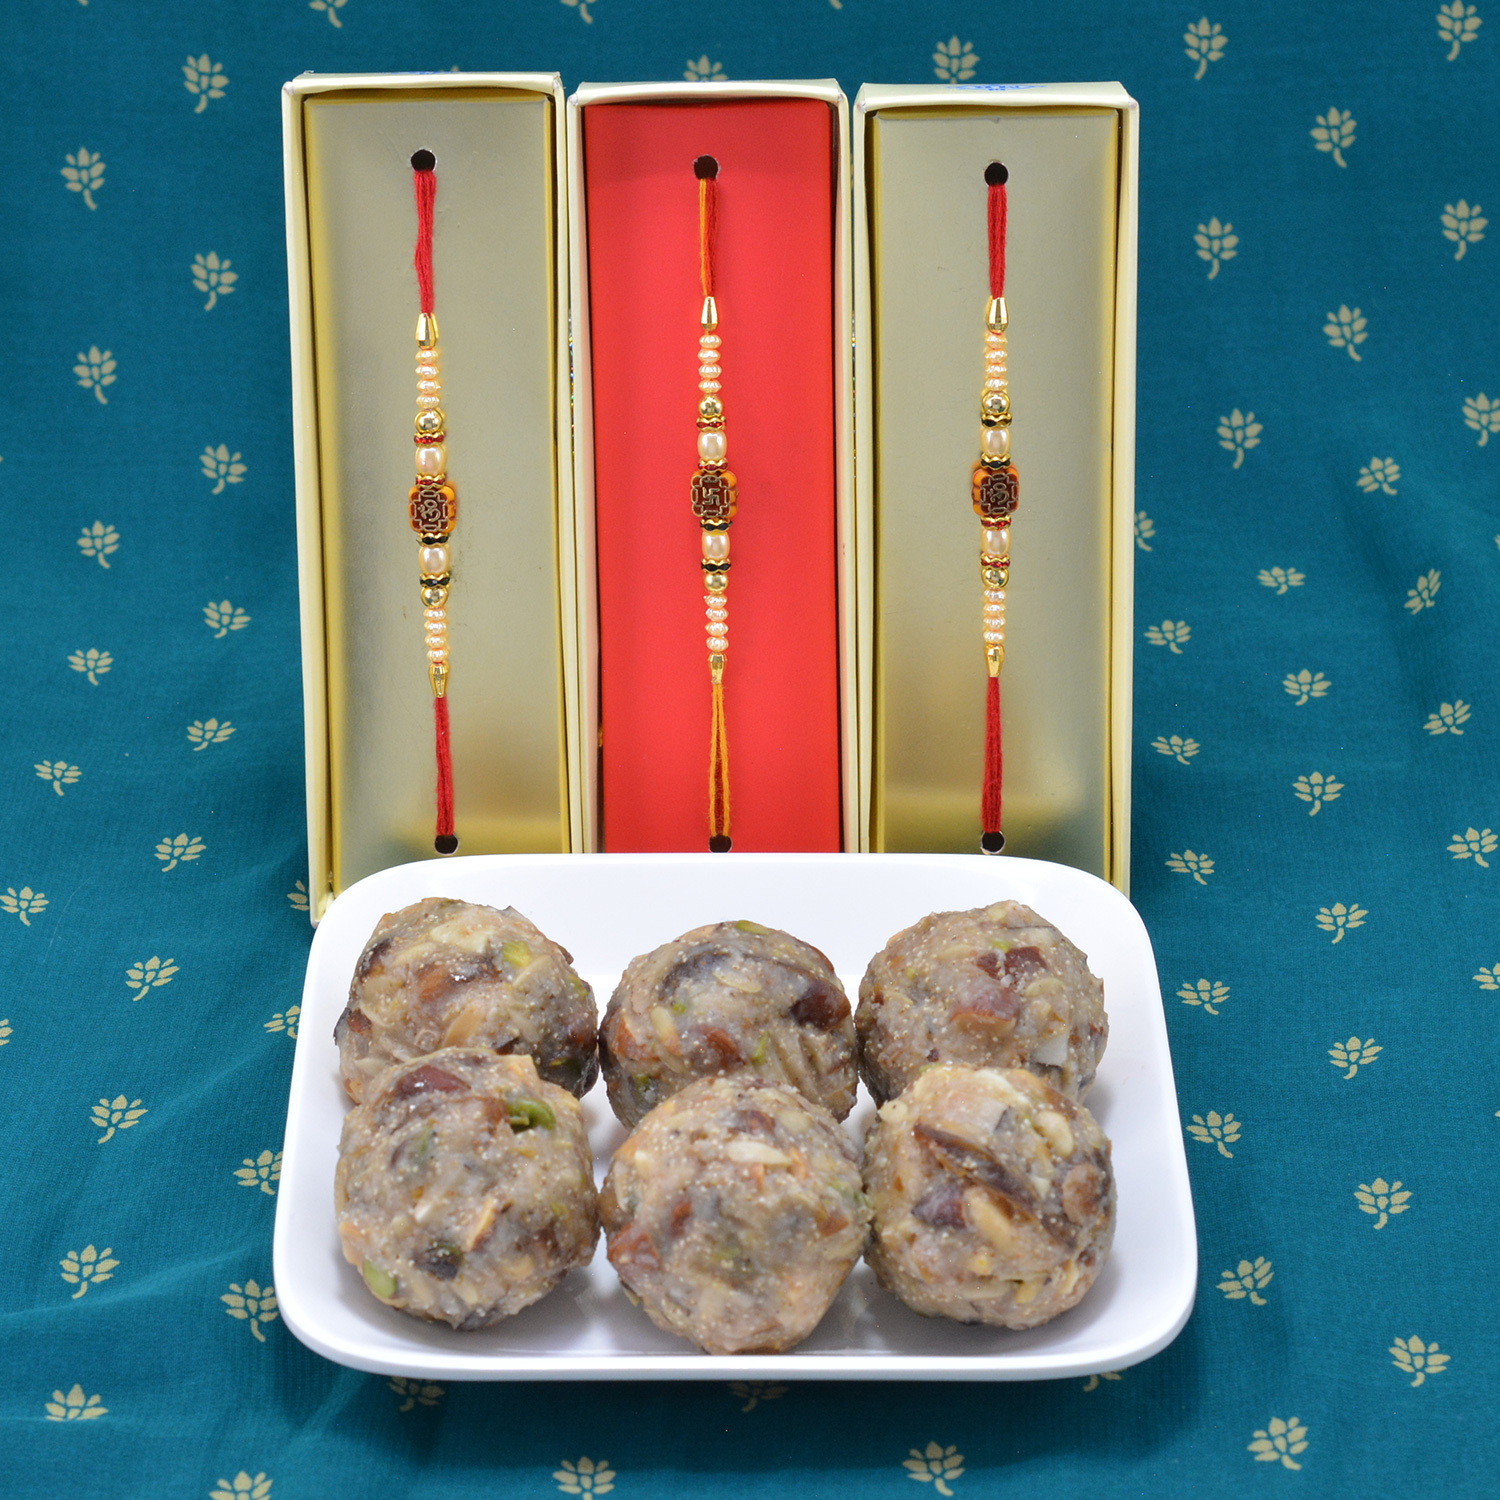 3 Simple Looking Pearl Thread Rakhi for Brothers with Quality of Branded Dry Fruits Laddu Sweet